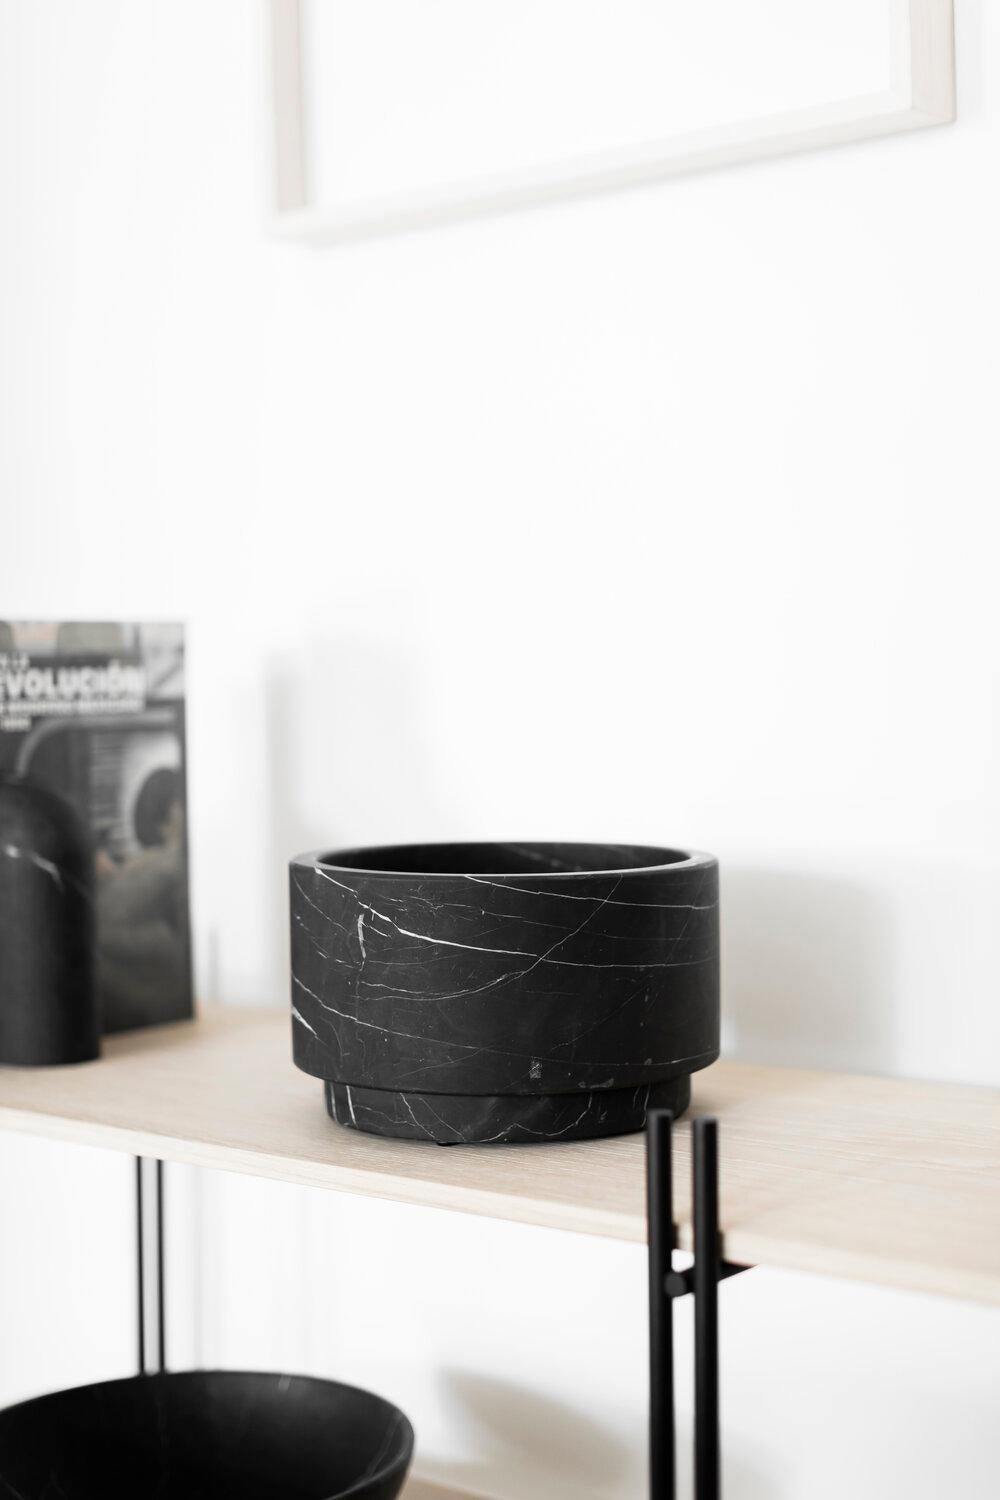 This artisanal home decor vase was hand cut Negro Monterrey black marble from Neuvo Leon, Mexico. Each piece is hand carved by expert artisans and craftsmen following fair trade practices and has a unique veining patterns that makes each piece a